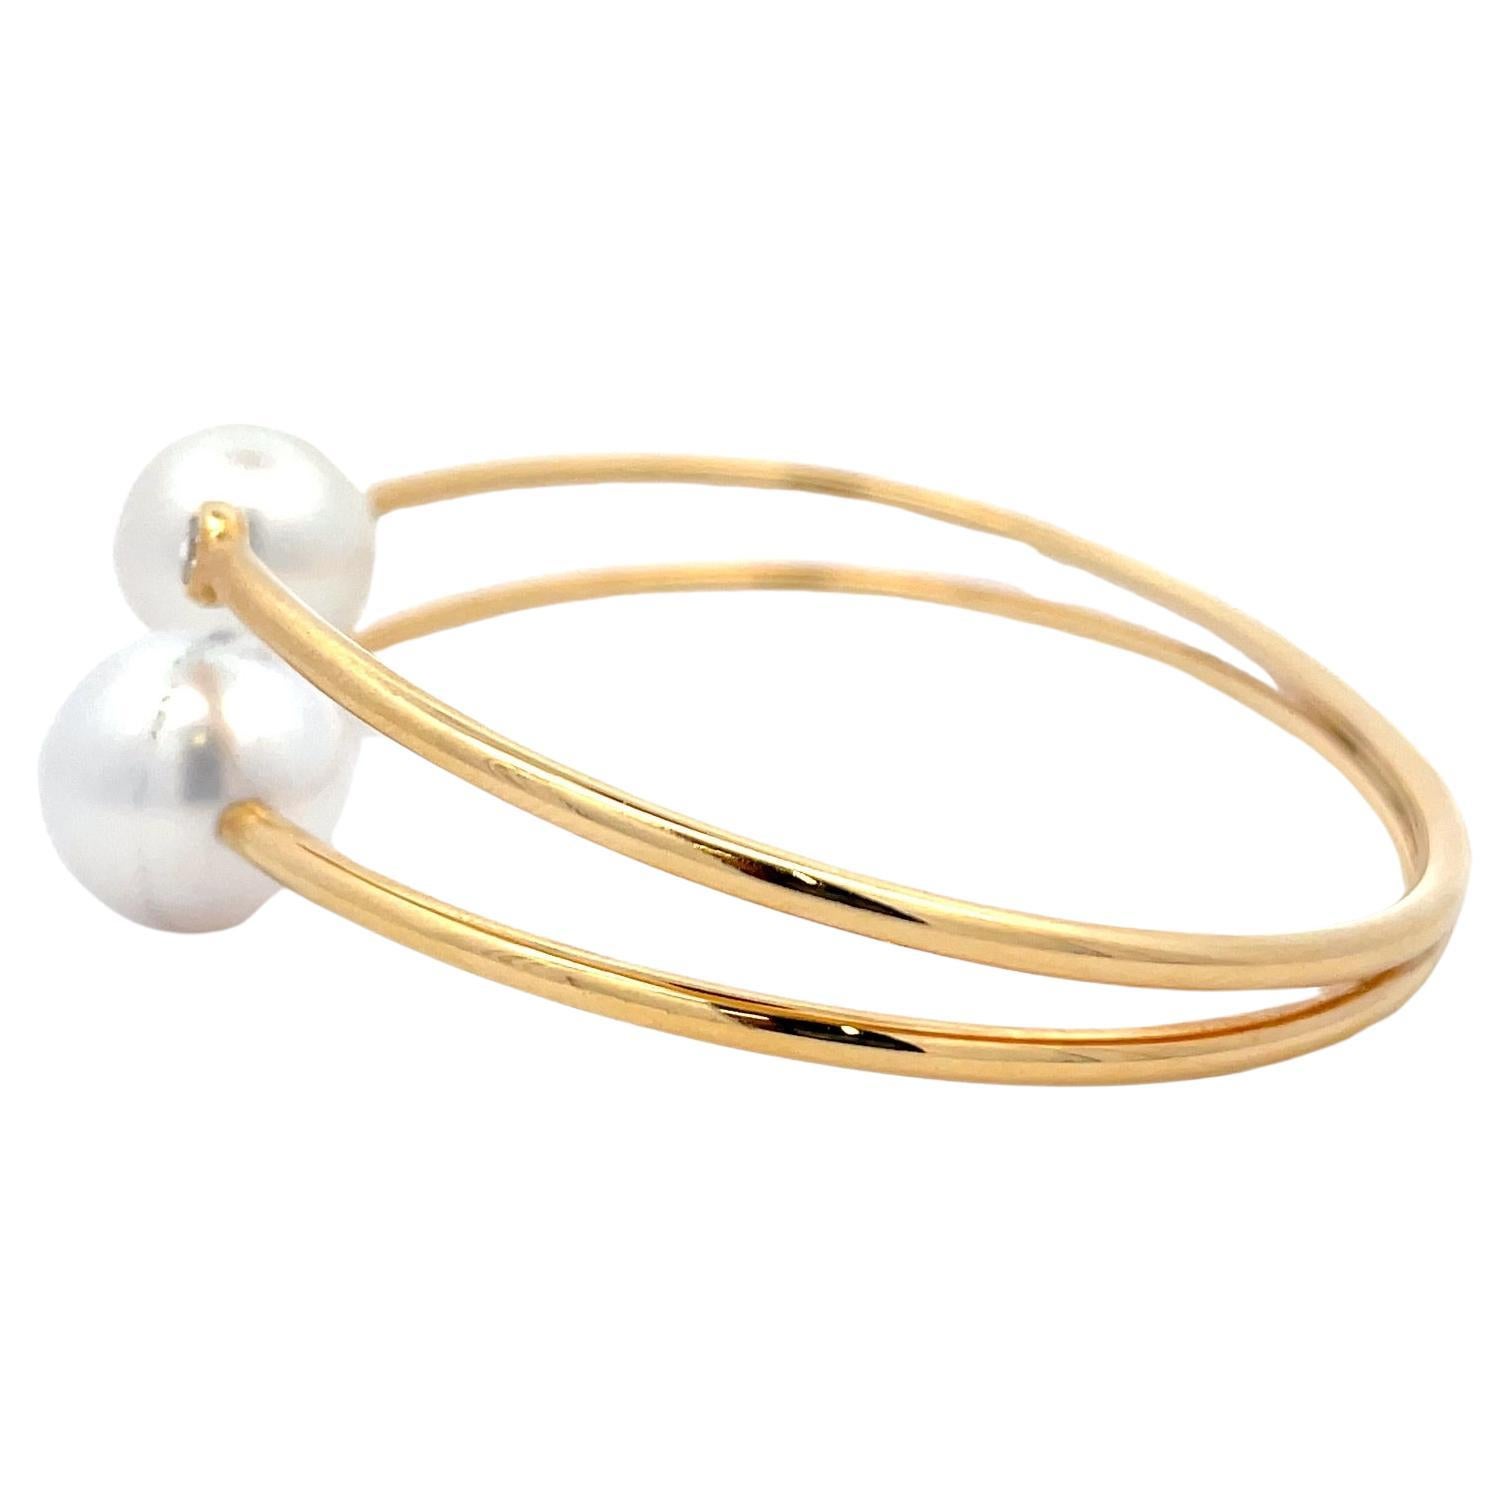 18 Karat yellow gold bangle cuff with 2 diamonds weighing 0.12 Carats and 2 South Sea Pearls measuring 9.50-10 mm. 